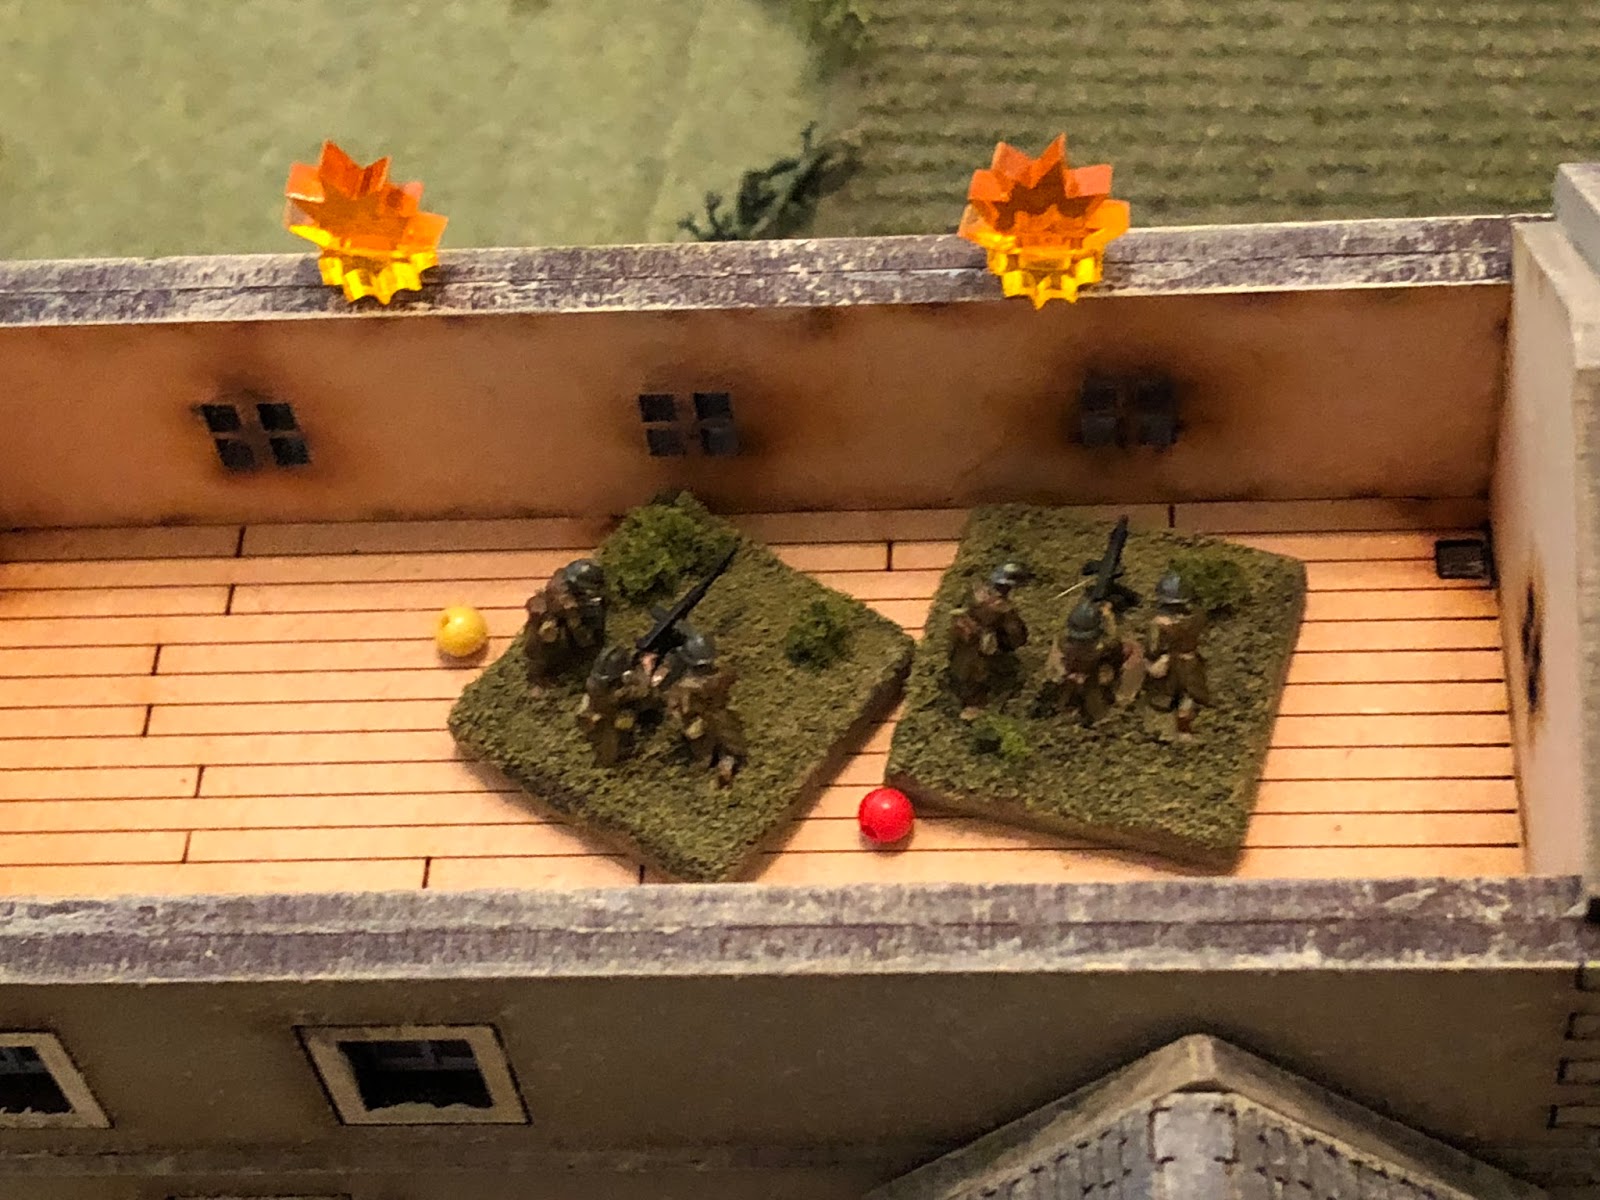  The German machine gun fire is very effective, pinning one French MG team and suppressing the other! 